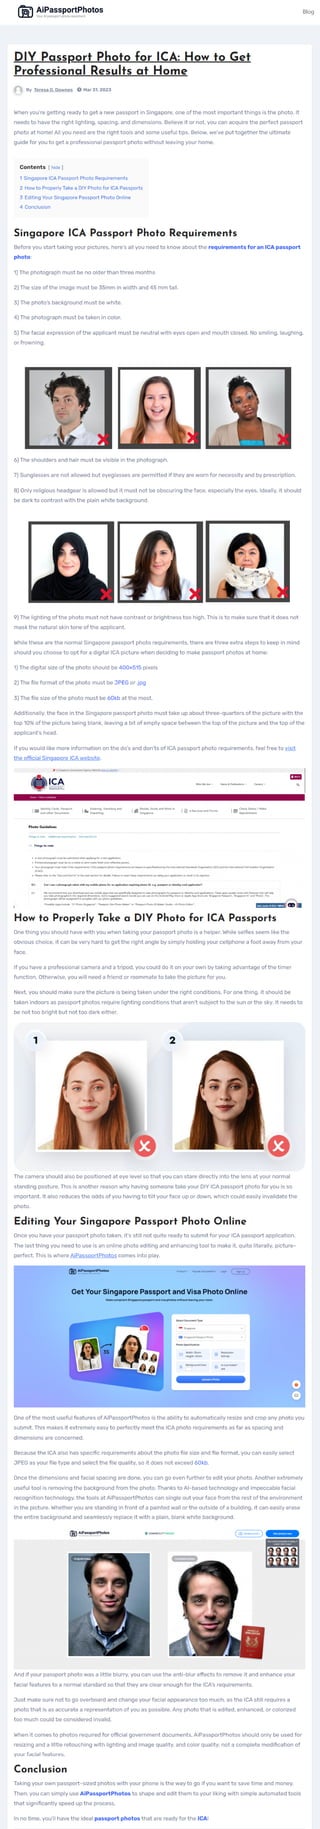 DIY Passport Photo Pro Results at Home for ICA